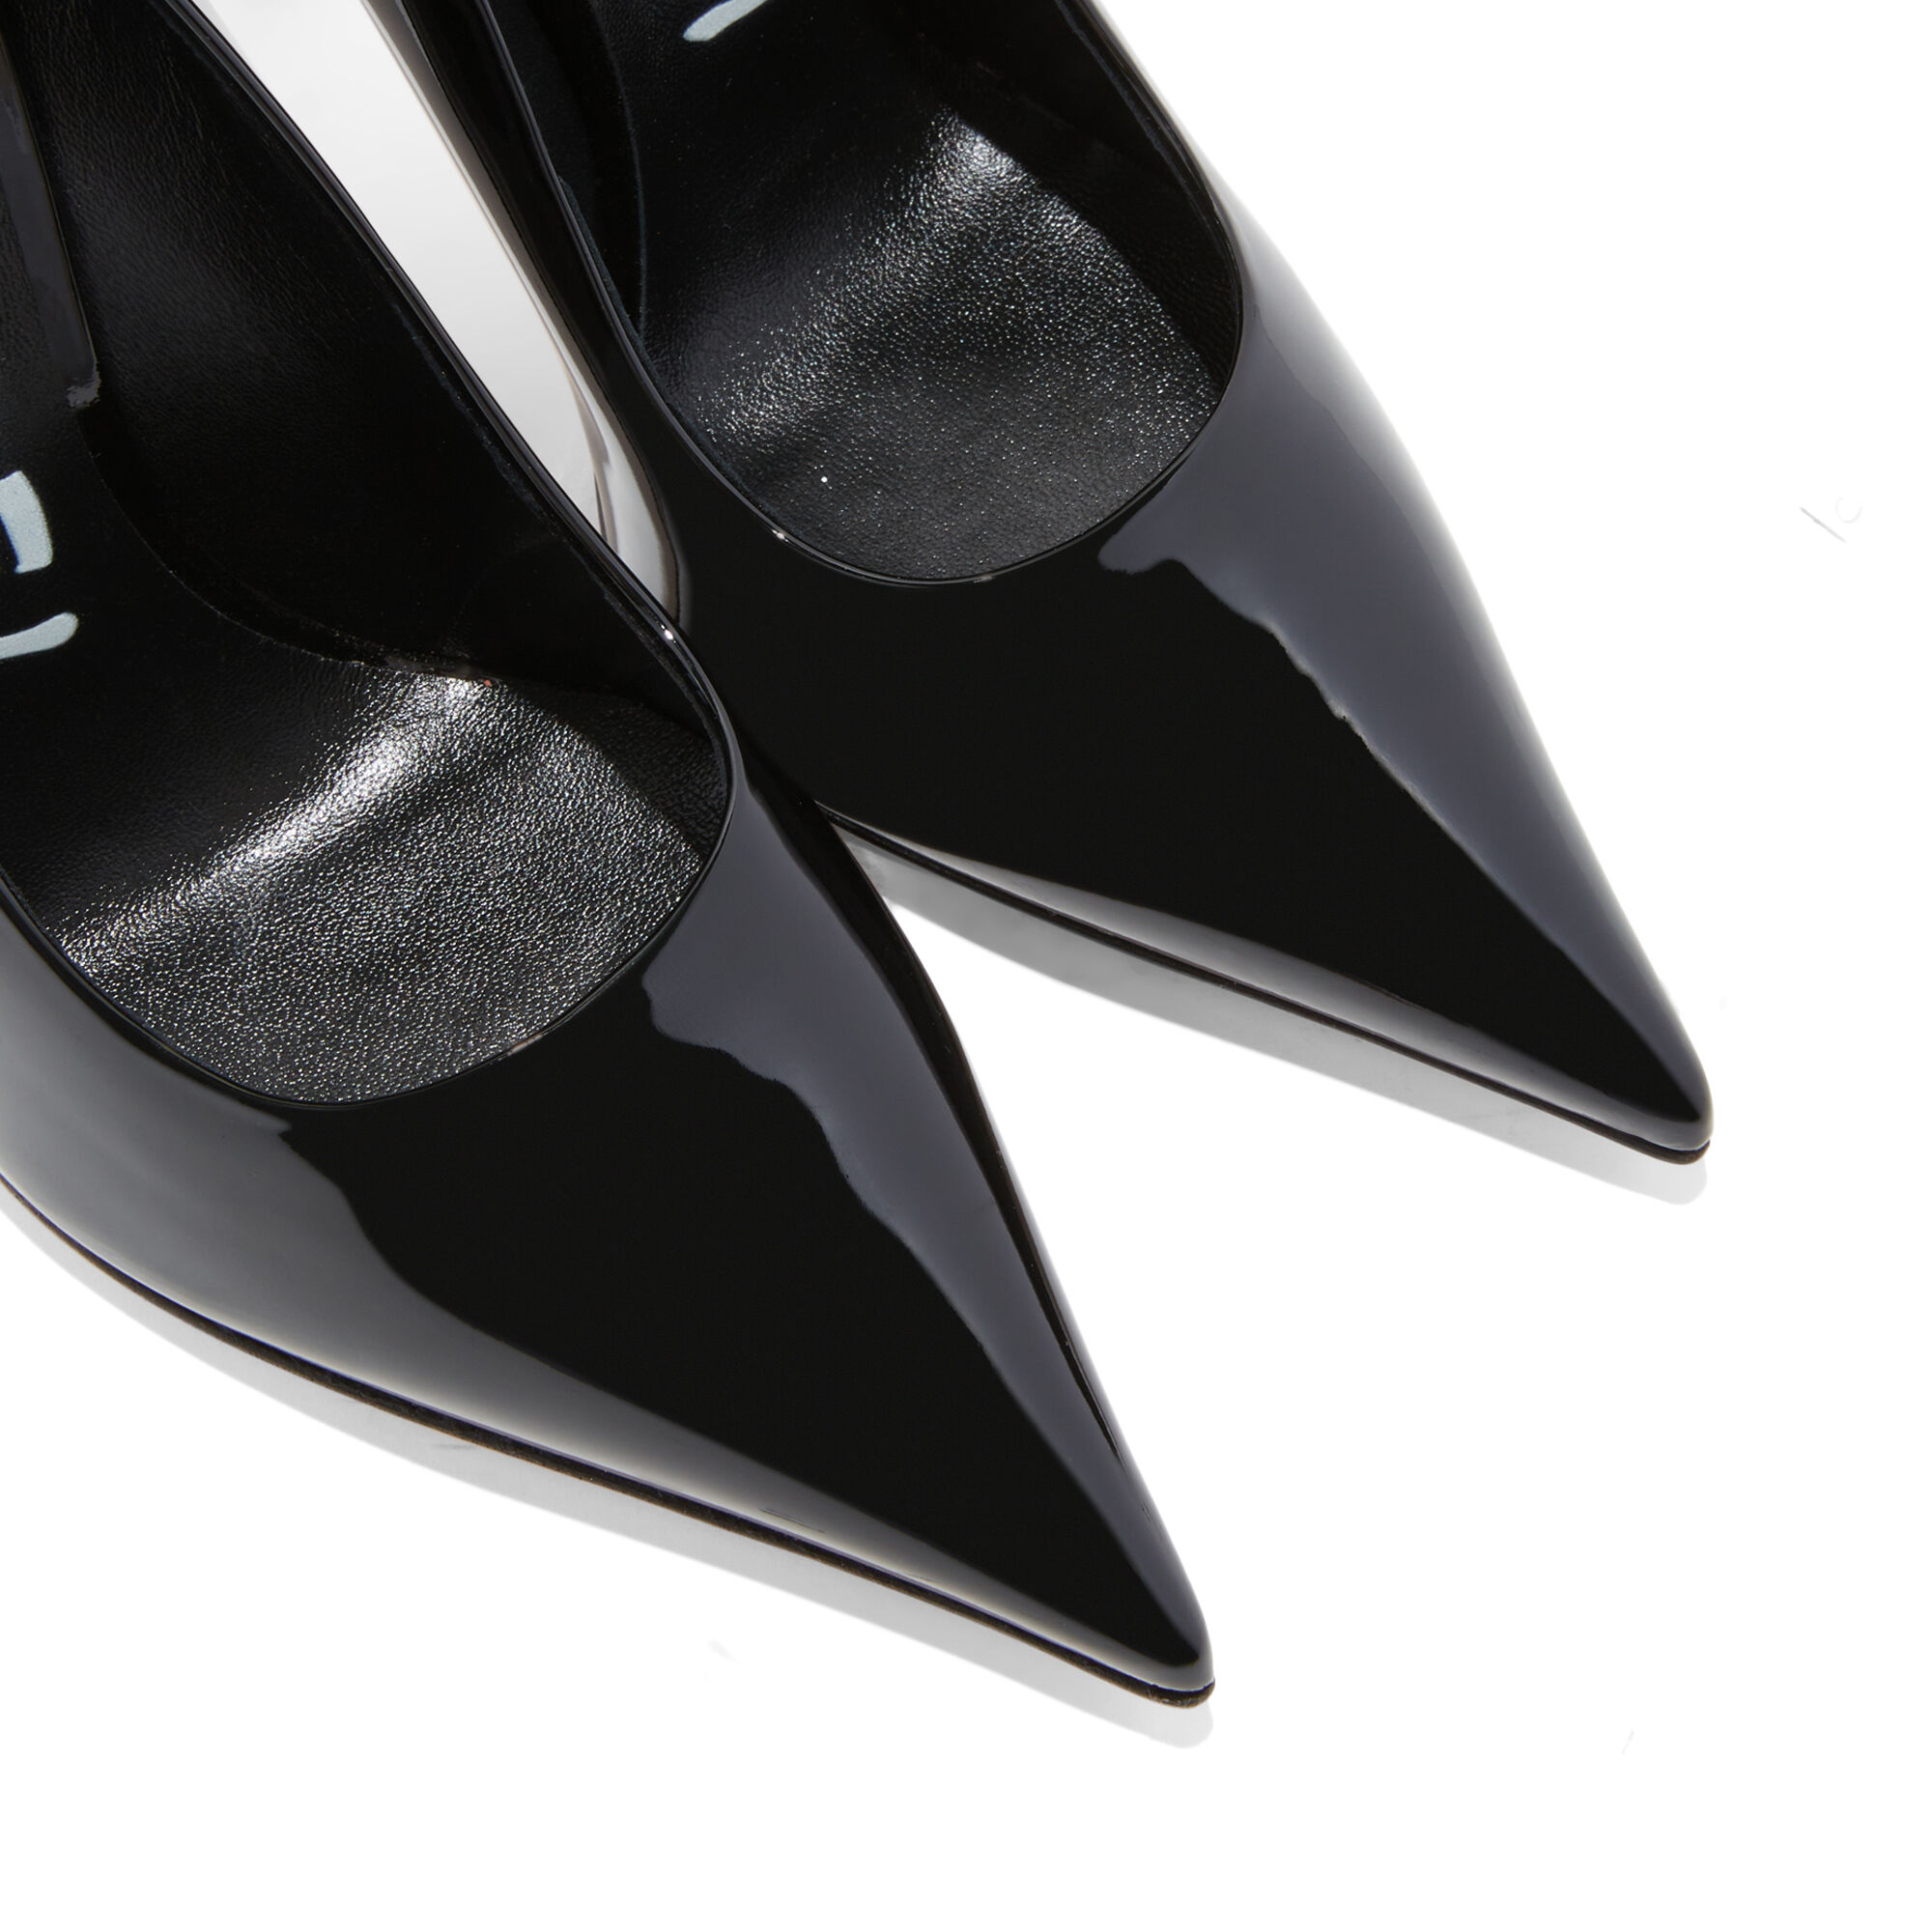 Superblade Patent Leather Pumps and Slingback in Black for Women 